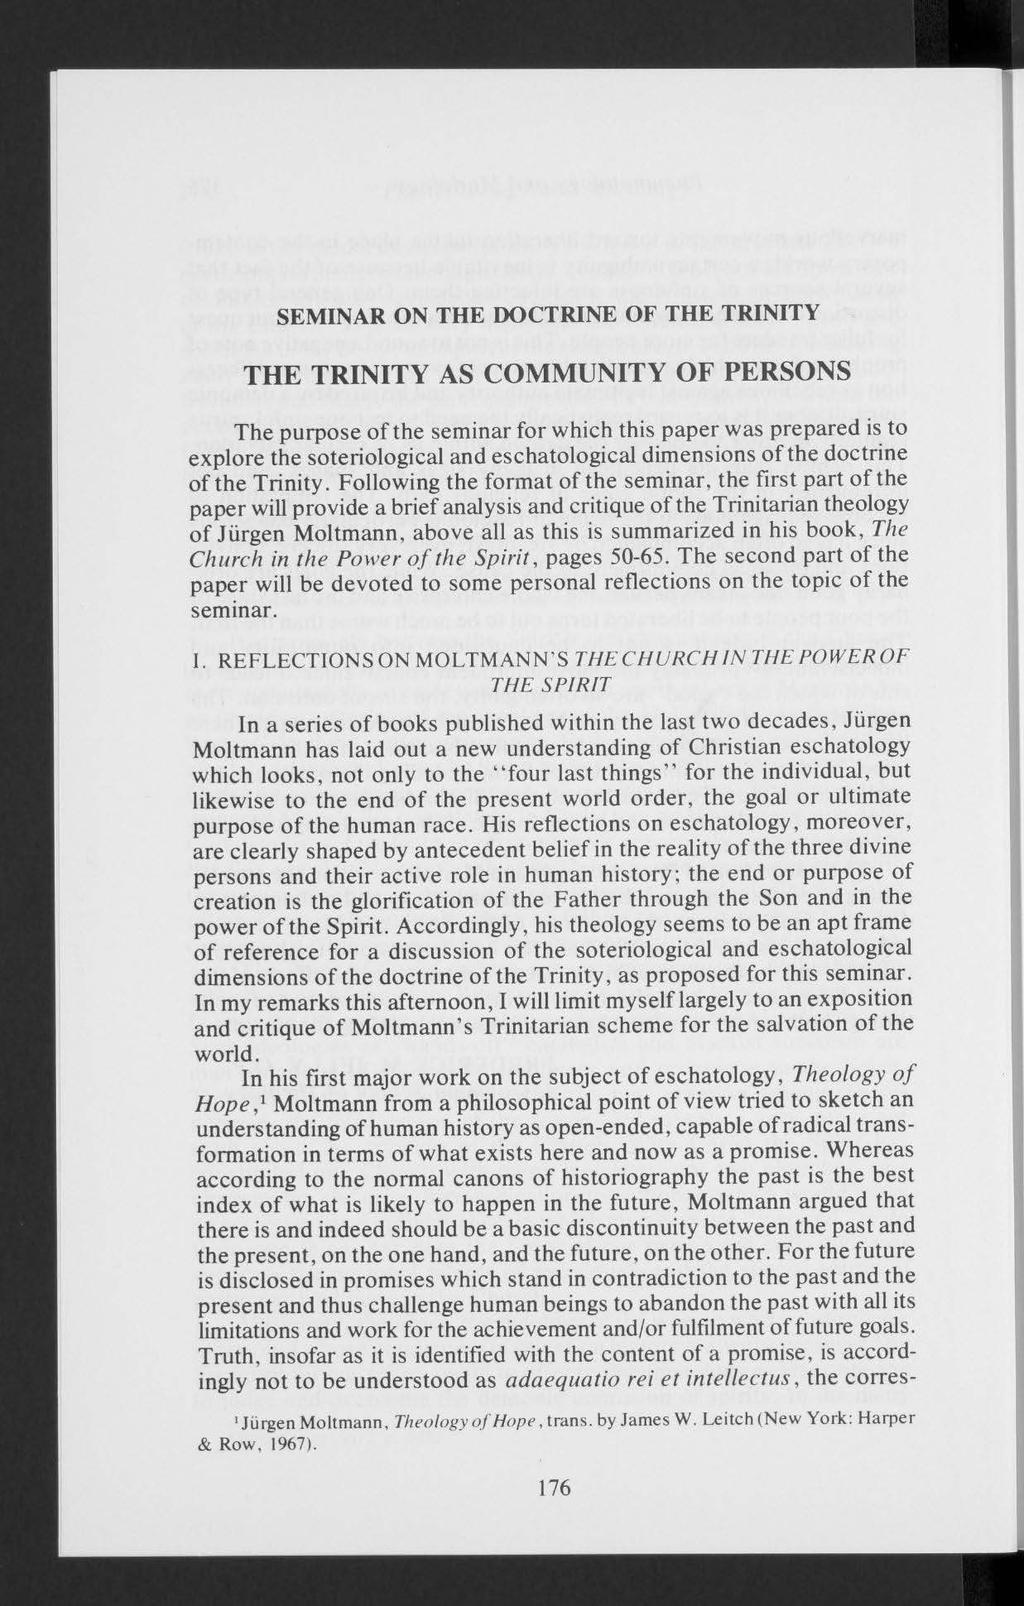 SEMINAR ON THE DOCTRINE OF THE TRINITY THE TRINITY AS COMMUNITY OF PERSONS The purpose of the seminar for which this paper was prepared is to explore the soteriological and eschatological dimensions